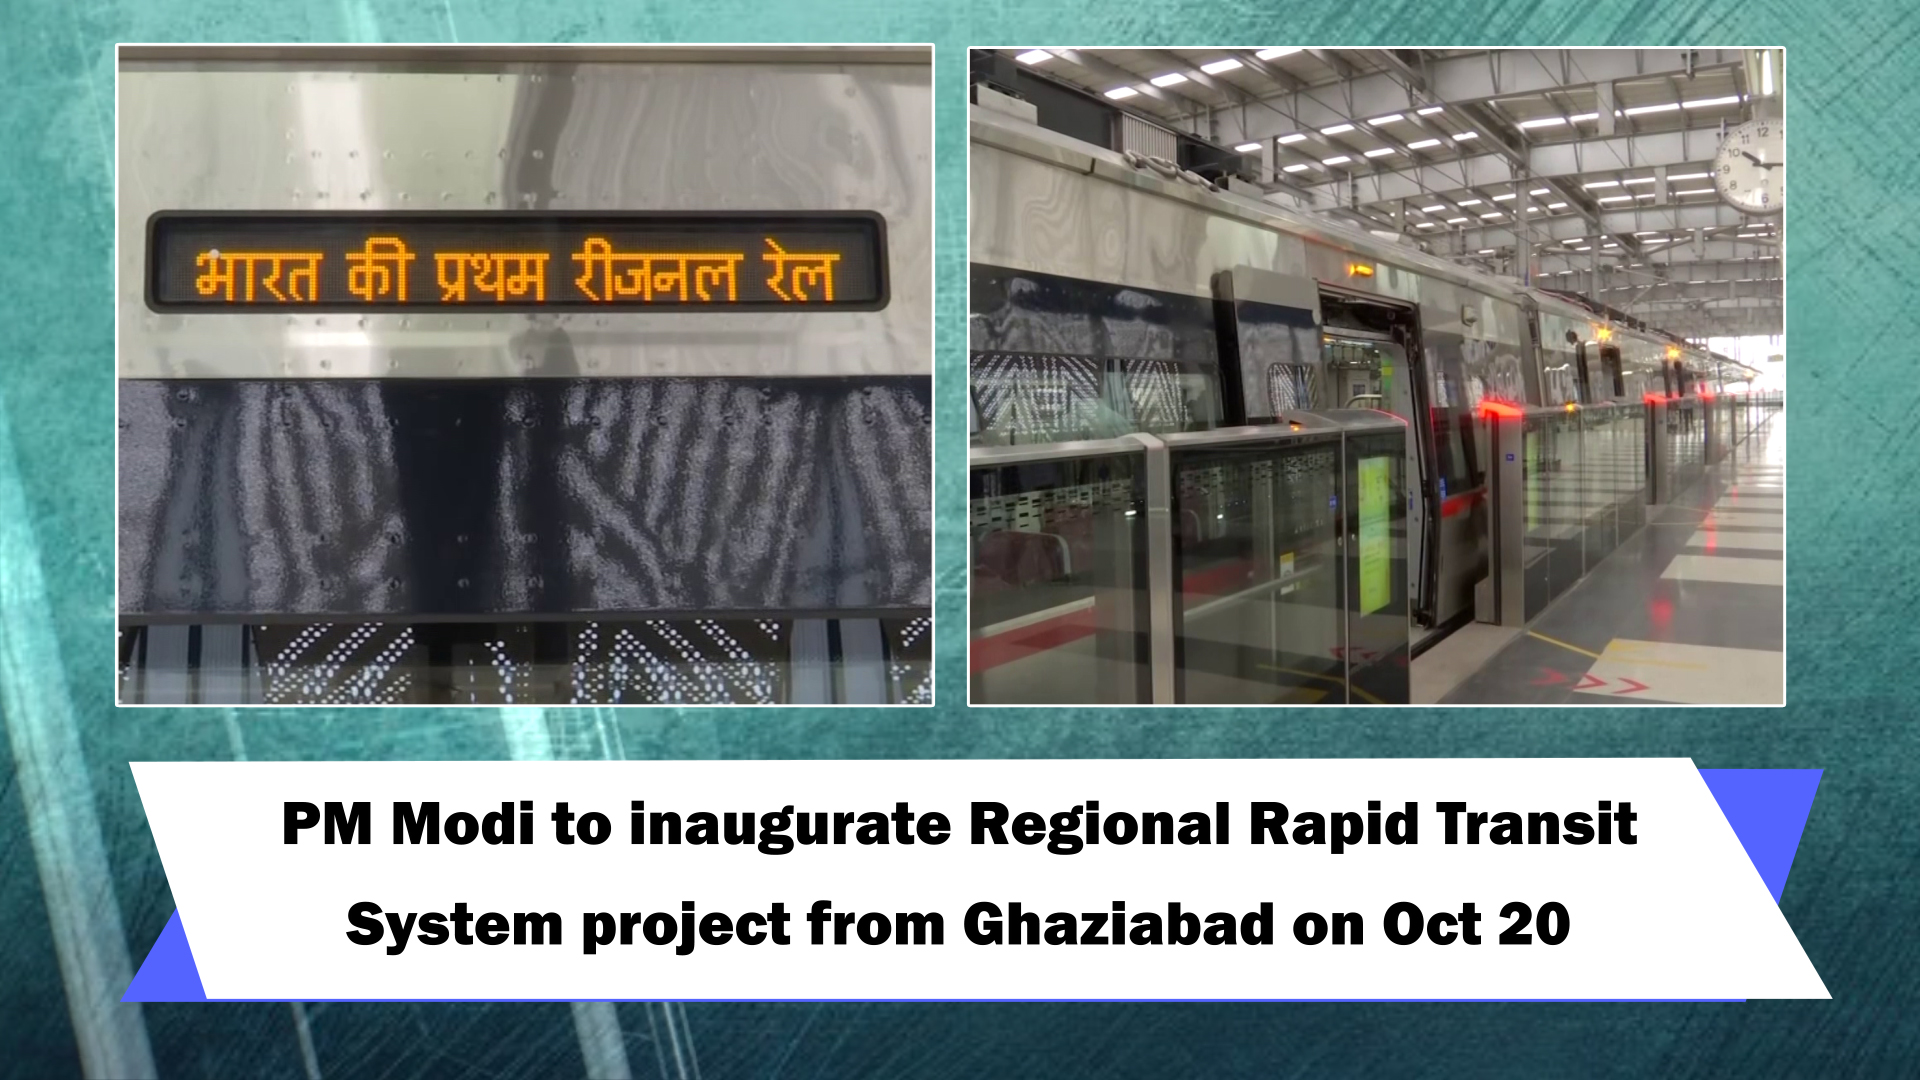 PM Narendra Modi to inaugurate Regional Rapid Transit System (RRTC) project from Ghaziabad